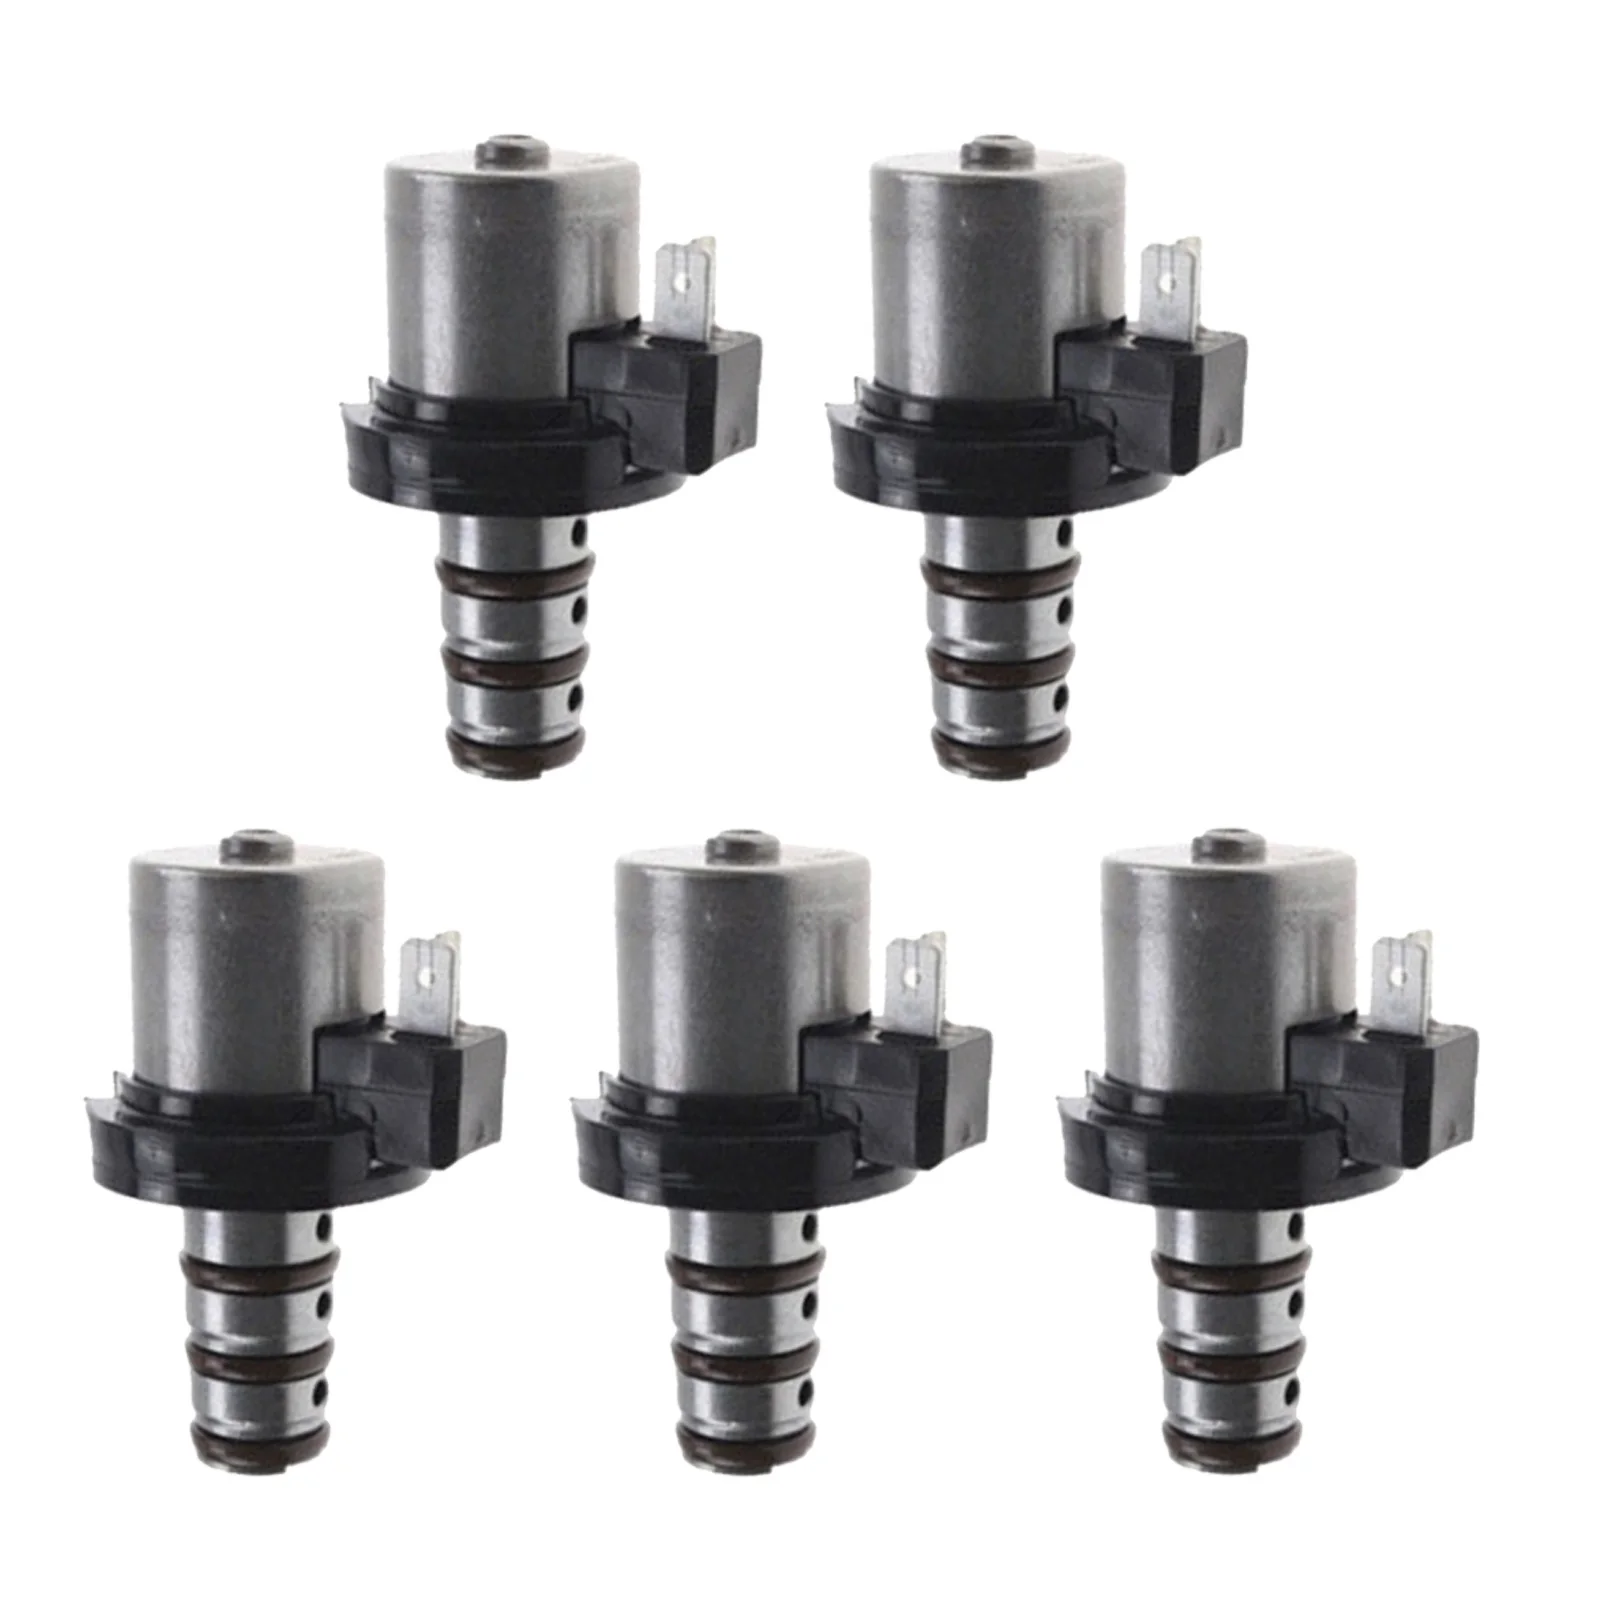 5-Pack Transmission Solenoid Set 8981 Replacement for for